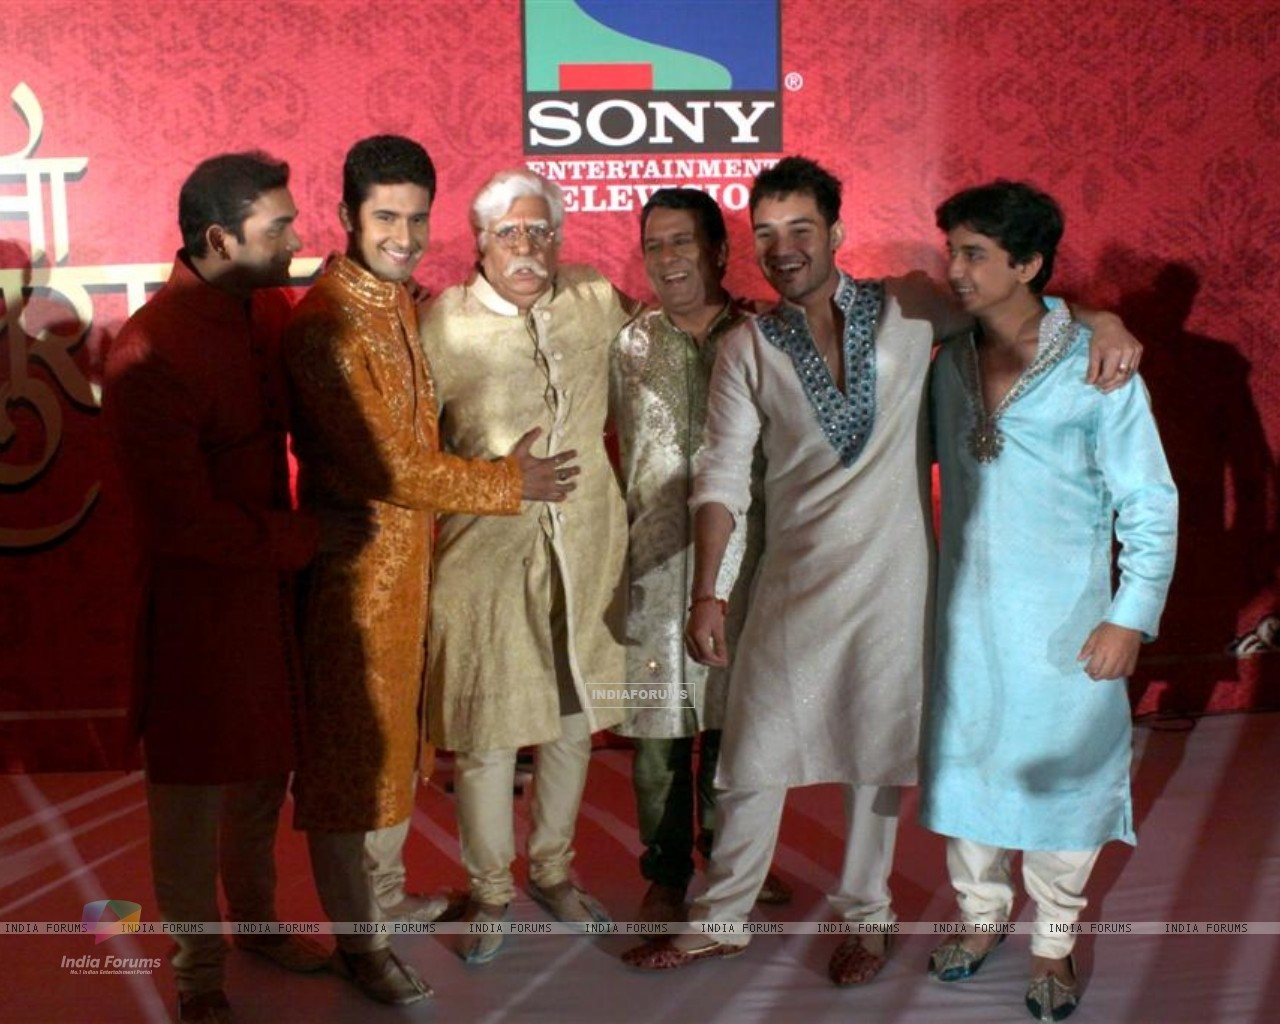  - 102200-srman-rajendra-ravi-dubey-and-meghan-at-press-conference-of-sony-new-s